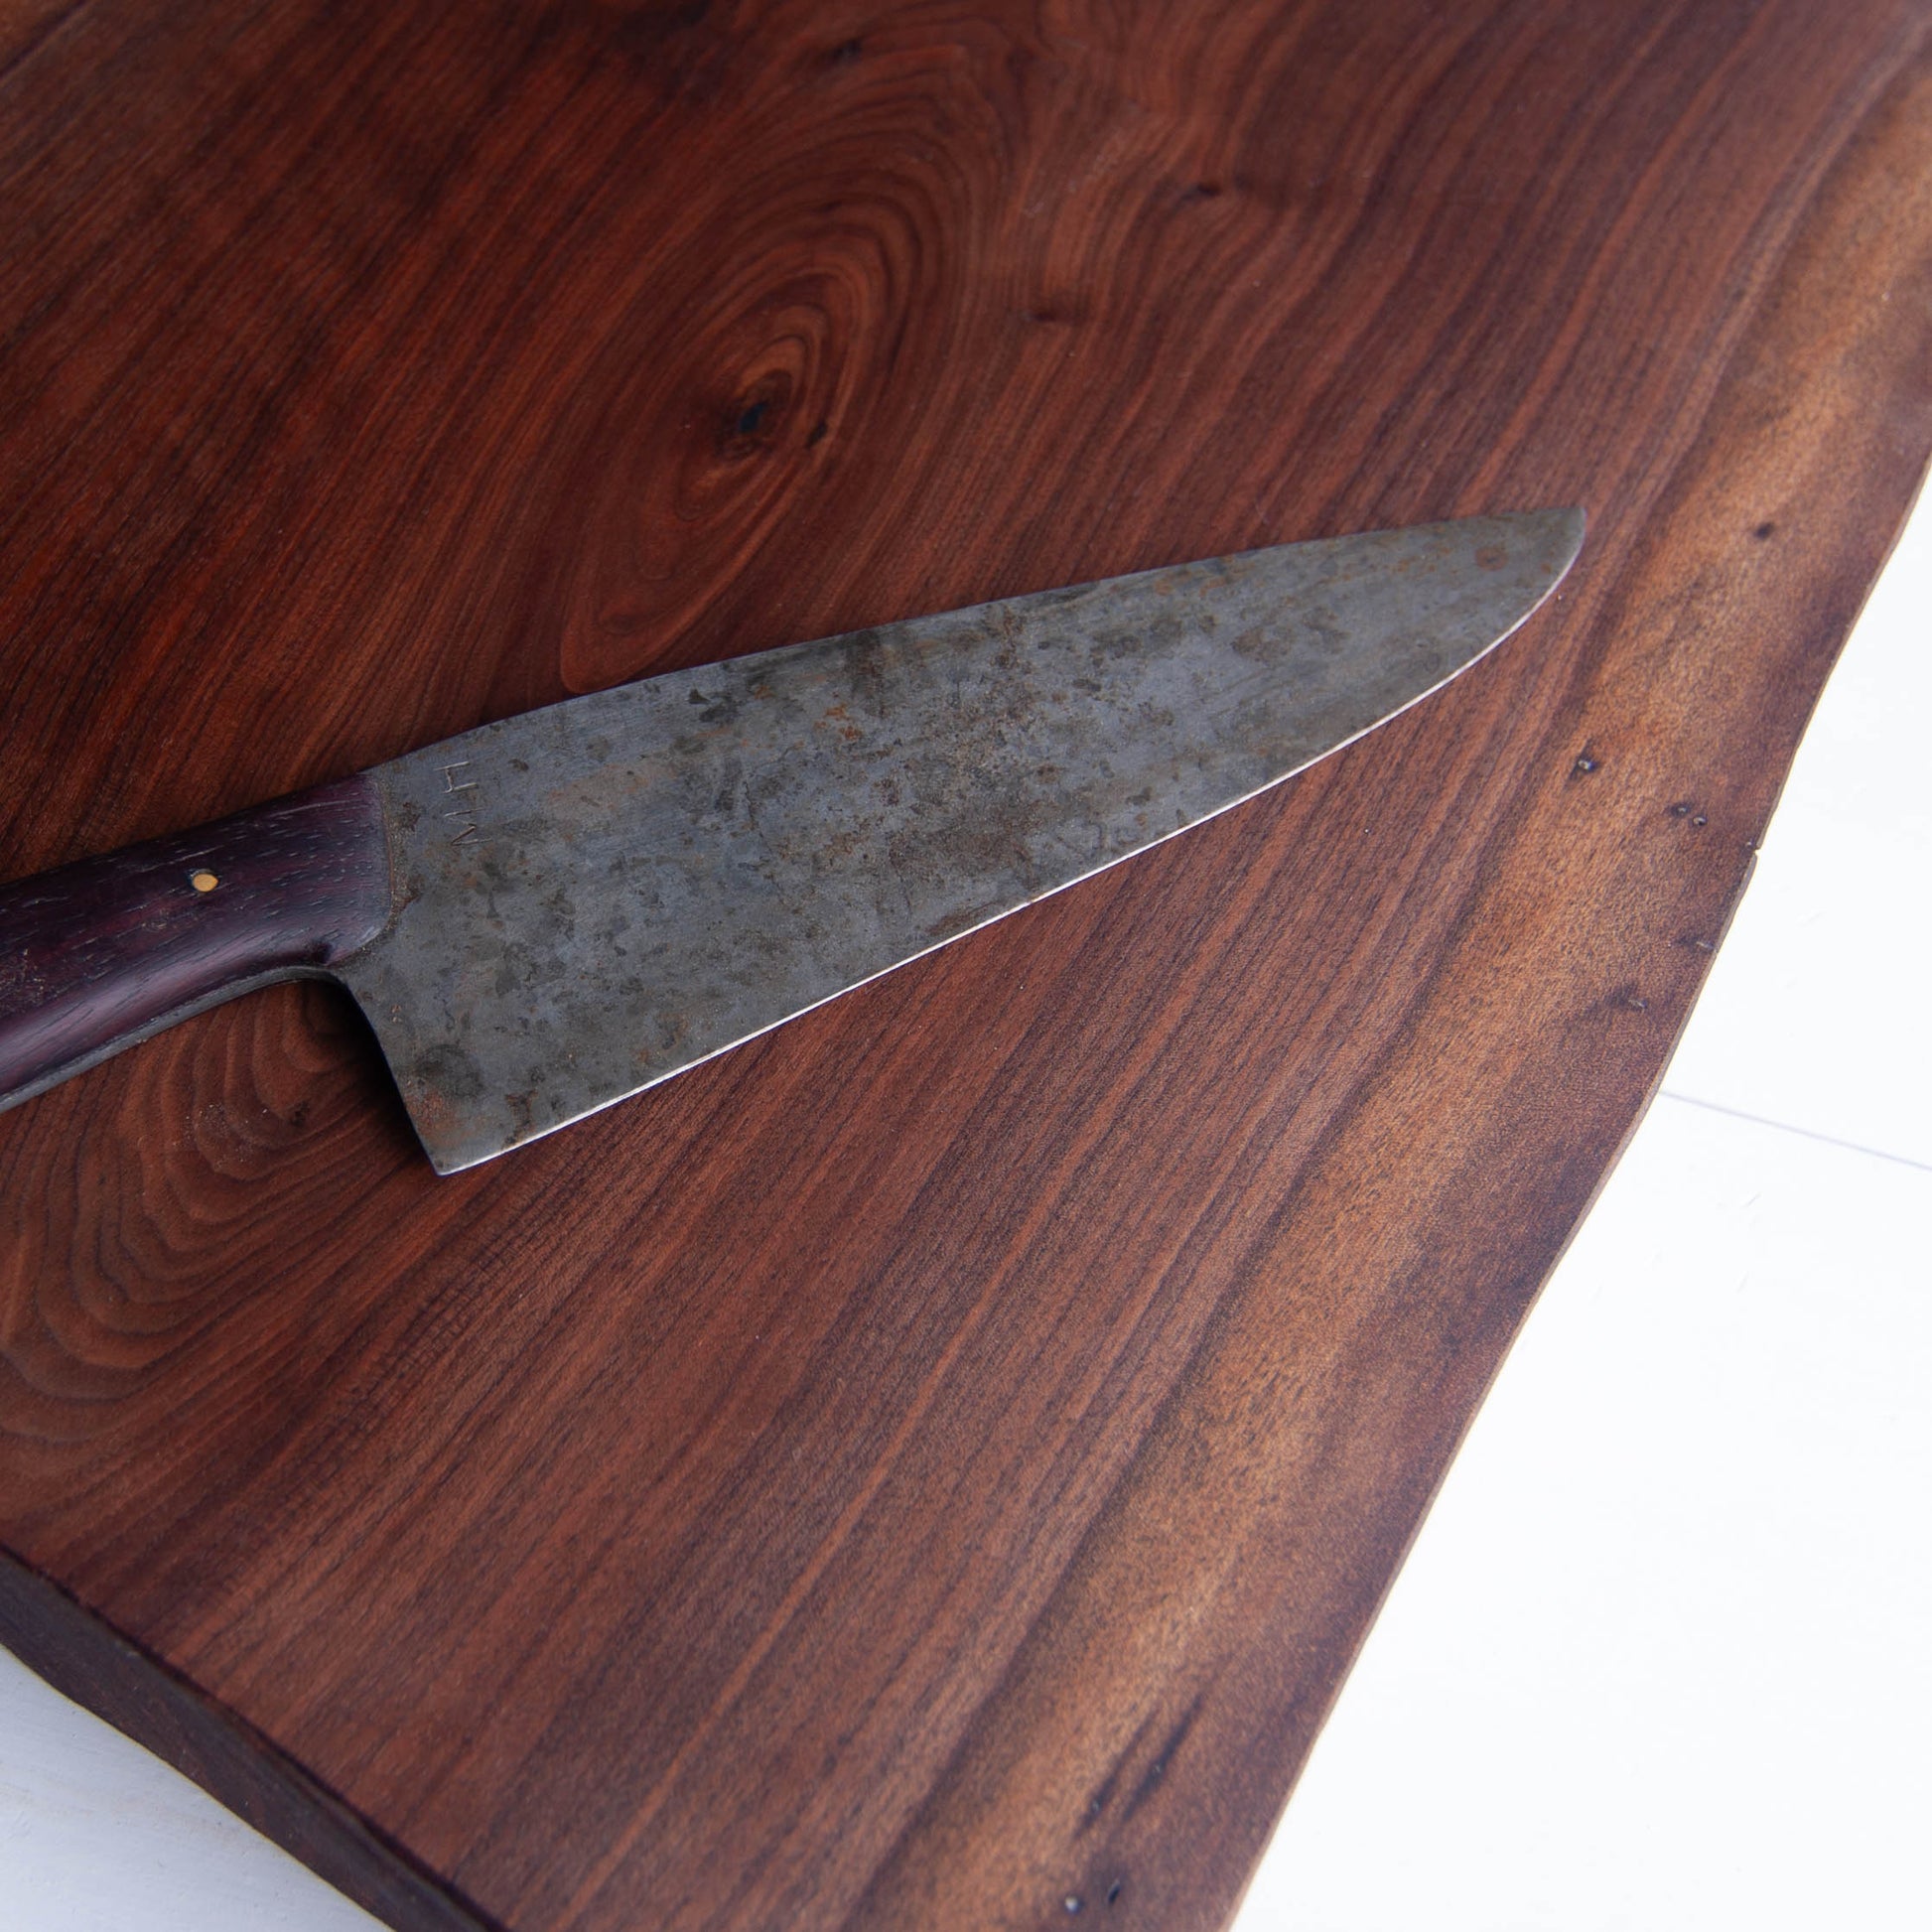 A close up of a walnut cutting board to show the figured grain with a kitchen knife on top